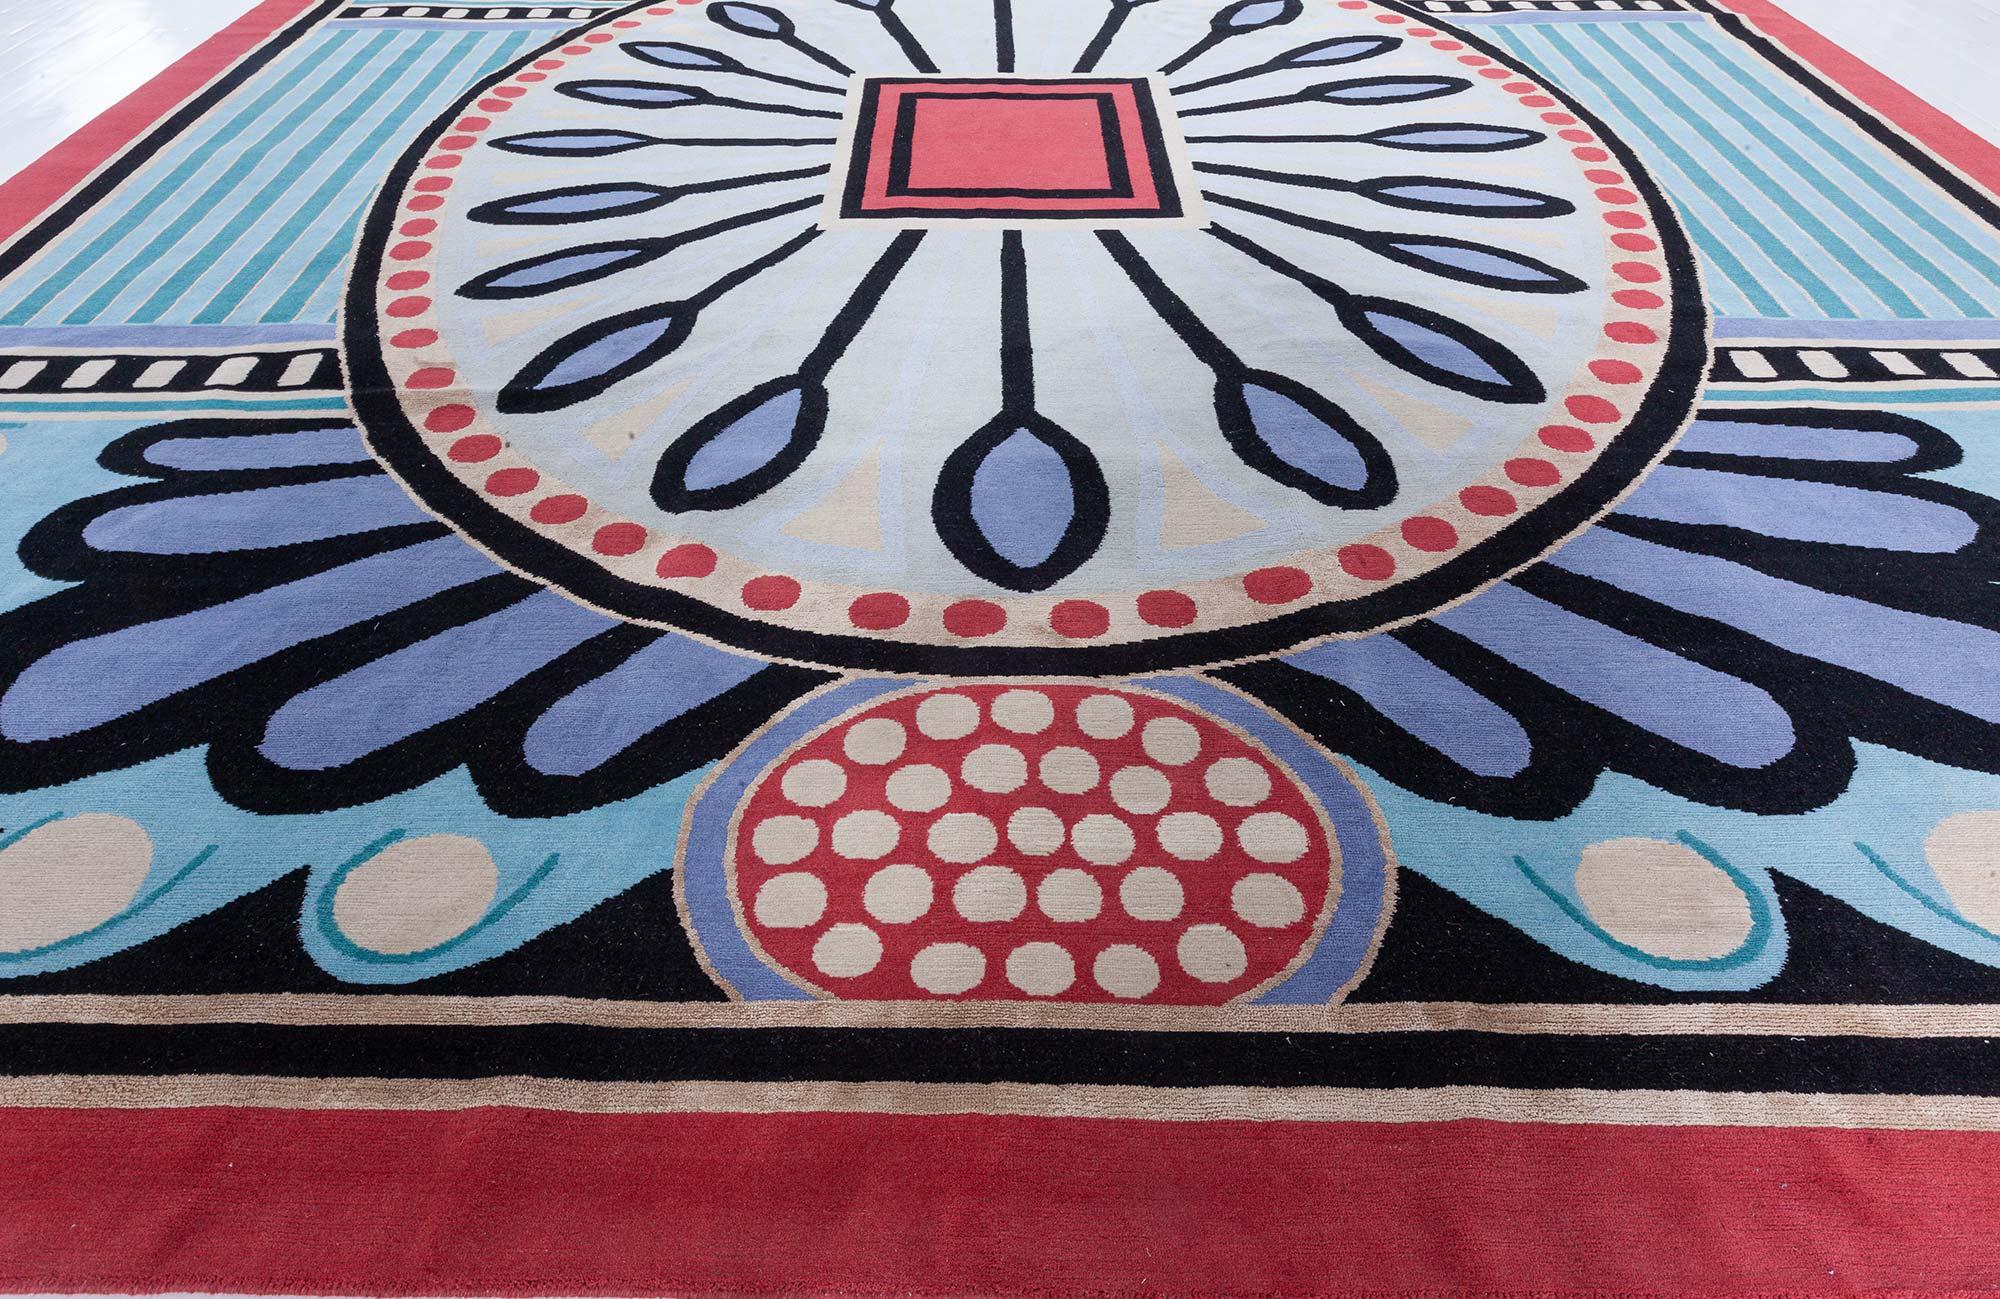 Peacock Art Deco Inspired Wool Rug by Doris Leslie Blau In New Condition For Sale In New York, NY